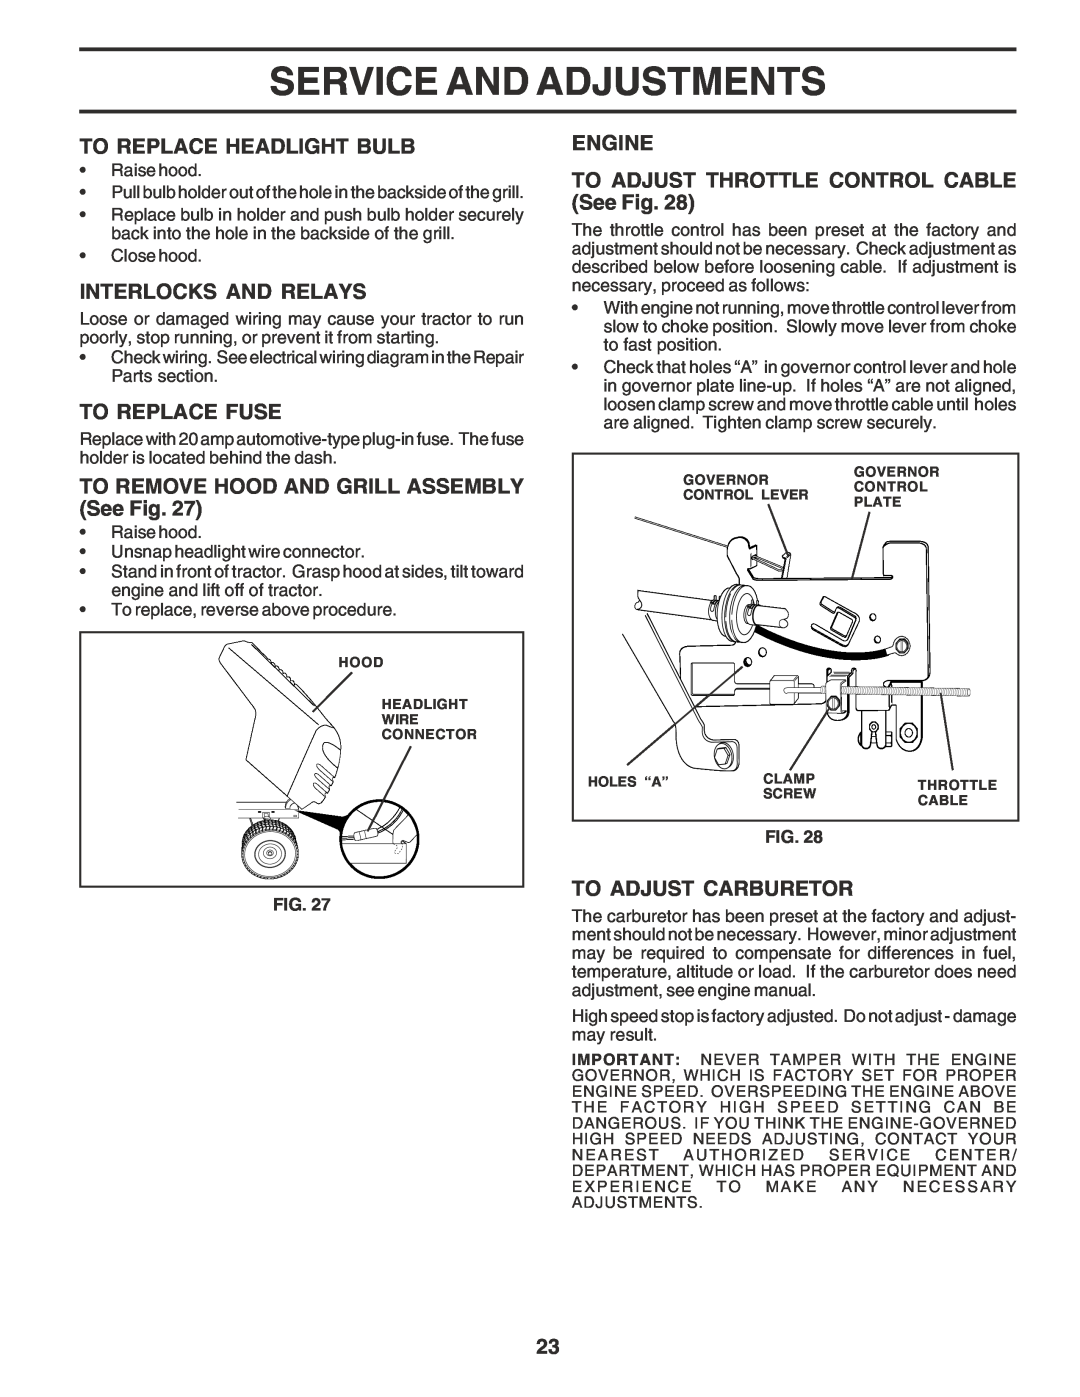 Weed Eater WE1538B manual To Replace Headlight Bulb, Interlocks And Relays, To Replace Fuse, To Adjust Carburetor 